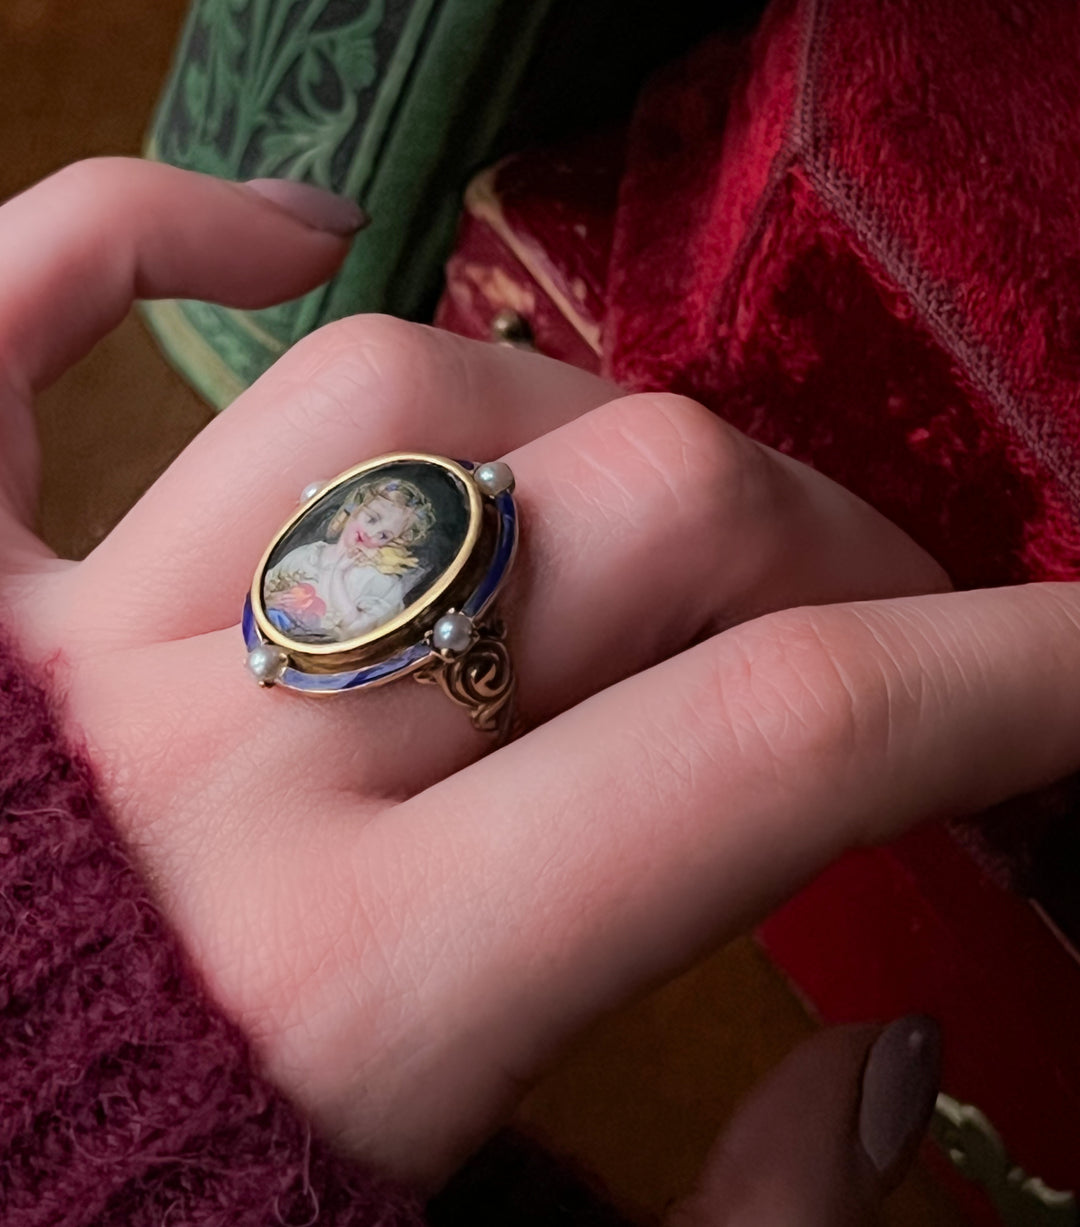 Enamel Portrait Ring of Young Girl with European Goldfinch